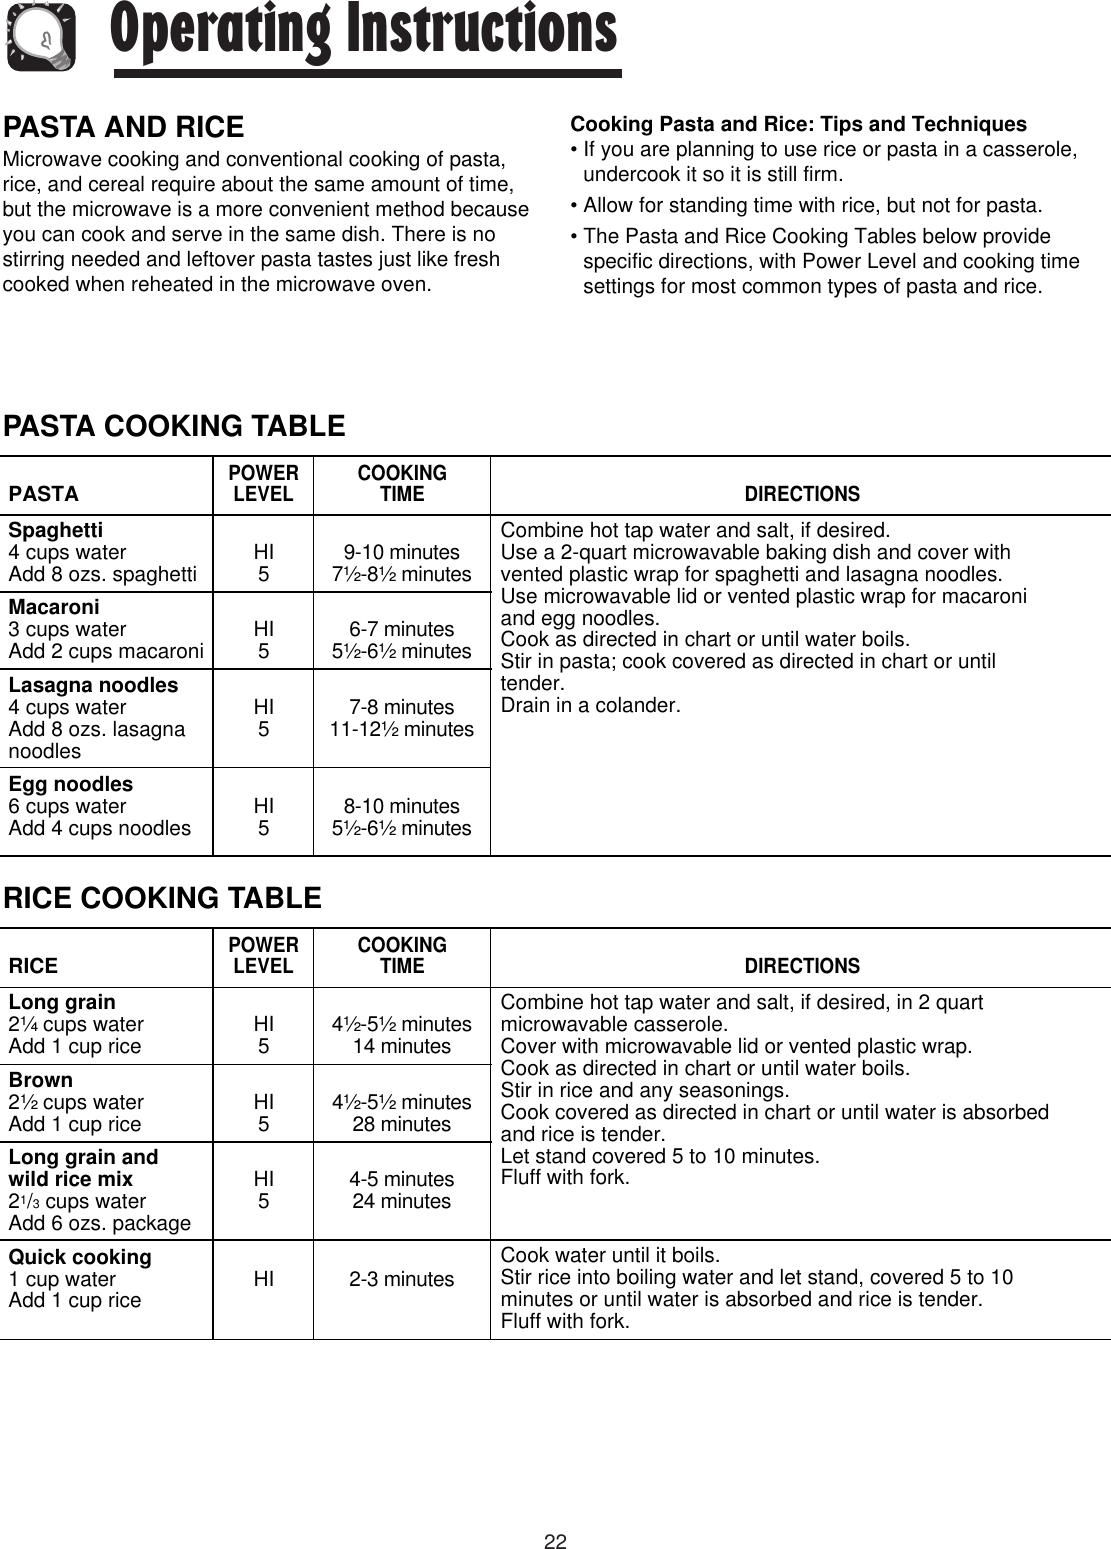 22Operating InstructionsPASTA AND RICEMicrowave cooking and conventional cooking of pasta,rice, and cereal require about the same amount of time,but the microwave is a more convenient method becauseyou can cook and serve in the same dish. There is nostirring needed and leftover pasta tastes just like freshcooked when reheated in the microwave oven.Cooking Pasta and Rice: Tips and Techniques• If you are planning to use rice or pasta in a casserole,undercook it so it is still firm.• Allow for standing time with rice, but not for pasta.• The Pasta and Rice Cooking Tables below providespecific directions, with Power Level and cooking timesettings for most common types of pasta and rice.PASTA COOKING TABLEPASTASpaghetti4 cups waterAdd 8 ozs. spaghettiMacaroni3 cups waterAdd 2 cups macaroniLasagna noodles4 cups waterAdd 8 ozs. lasagnanoodlesEgg noodles6 cups waterAdd 4 cups noodlesHI5HI5HI5HI59-10 minutes7½-8½ minutes6-7 minutes5½-6½ minutes7-8 minutes11-12½ minutes8-10 minutes5½-6½ minutesCombine hot tap water and salt, if desired.Use a 2-quart microwavable baking dish and cover withvented plastic wrap for spaghetti and lasagna noodles.Use microwavable lid or vented plastic wrap for macaroniand egg noodles.Cook as directed in chart or until water boils.Stir in pasta; cook covered as directed in chart or untiltender.Drain in a colander.POWERLEVEL COOKINGTIME DIRECTIONSRICE COOKING TABLERICELong grain2¼ cups waterAdd 1 cup riceBrown2½ cups waterAdd 1 cup riceLong grain andwild rice mix21/3cups waterAdd 6 ozs. packageQuick cooking1 cup waterAdd 1 cup riceHI5HI5HI5HI4½-5½ minutes14 minutes4½-5½ minutes28 minutes4-5 minutes24 minutes2-3 minutesCombine hot tap water and salt, if desired, in 2 quartmicrowavable casserole.Cover with microwavable lid or vented plastic wrap.Cook as directed in chart or until water boils.Stir in rice and any seasonings.Cook covered as directed in chart or until water is absorbedand rice is tender.Let stand covered 5 to 10 minutes.Fluff with fork.Cook water until it boils.Stir rice into boiling water and let stand, covered 5 to 10minutes or until water is absorbed and rice is tender.Fluff with fork.POWERLEVEL COOKINGTIME DIRECTIONS